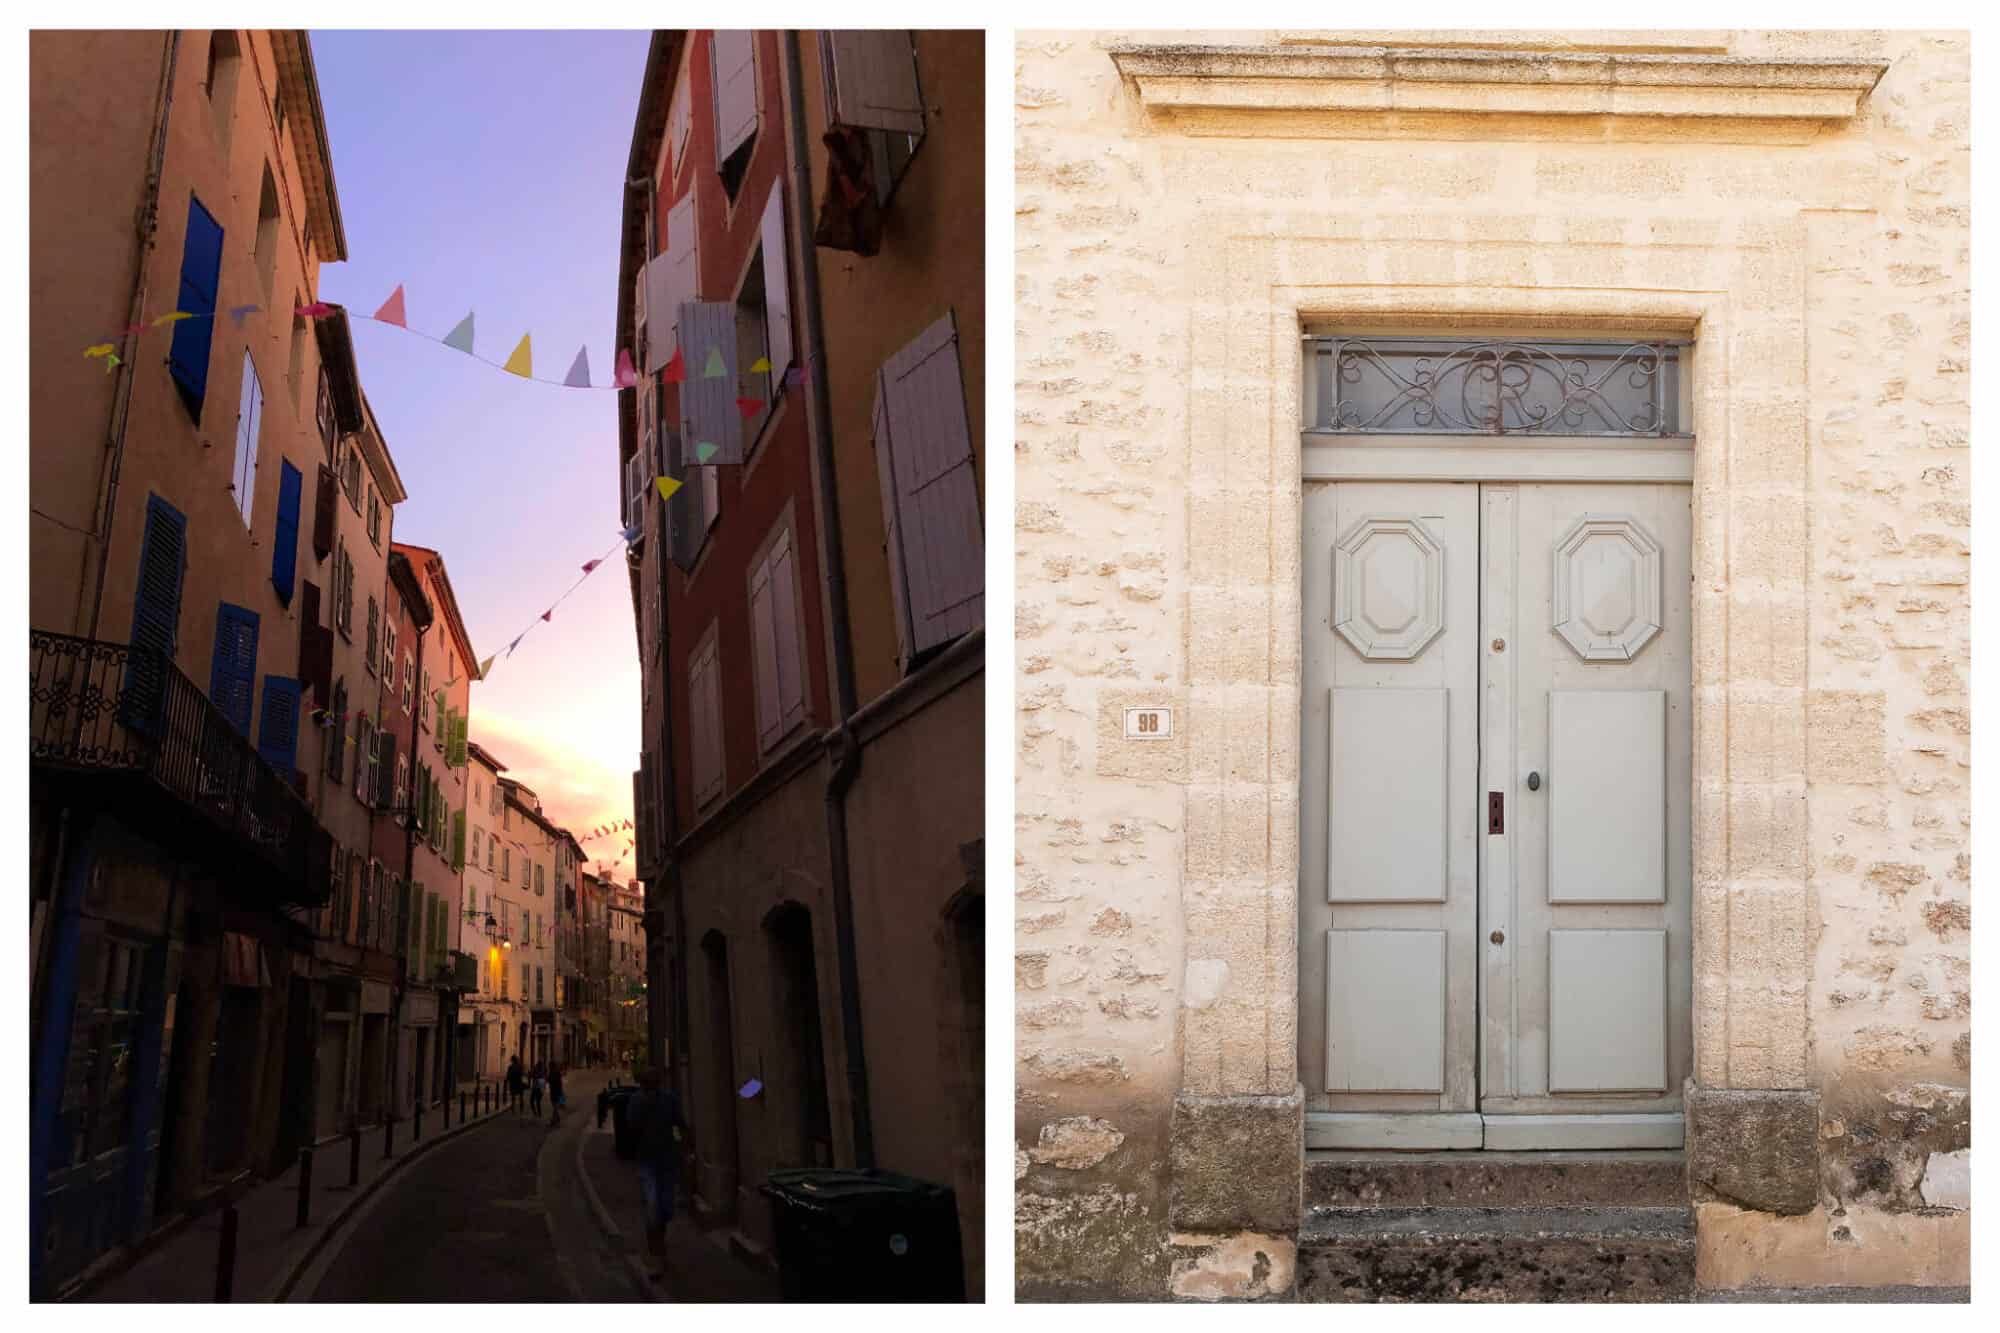 Left: a Provence street at sunset. Right: the front door of a house in Provence.